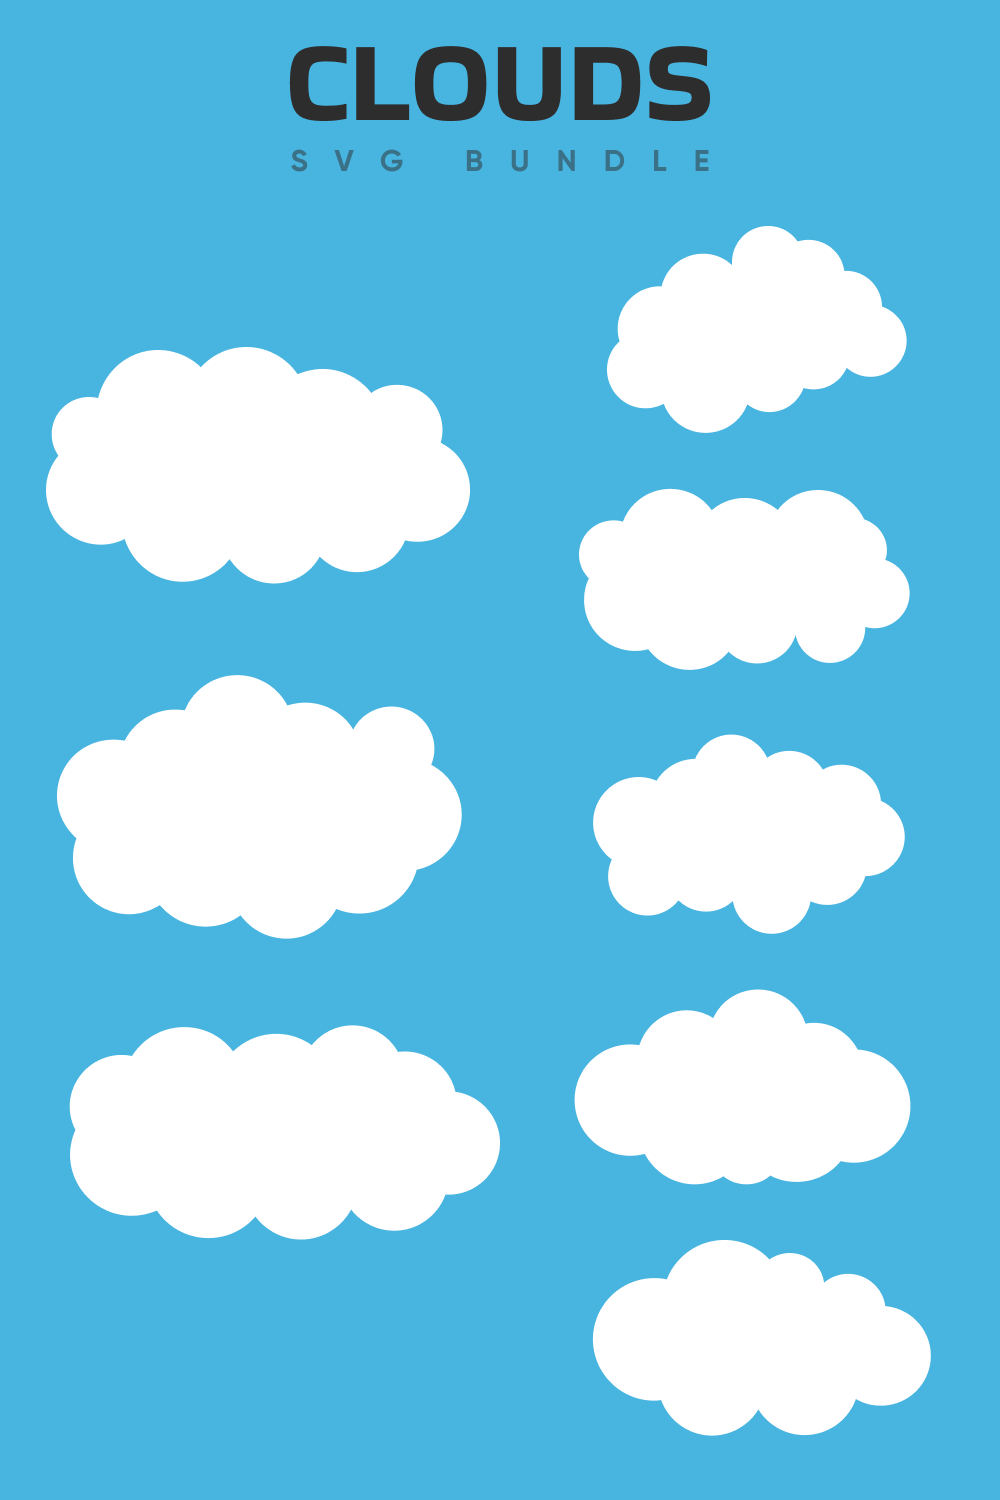 Soft white clouds on a blue background.